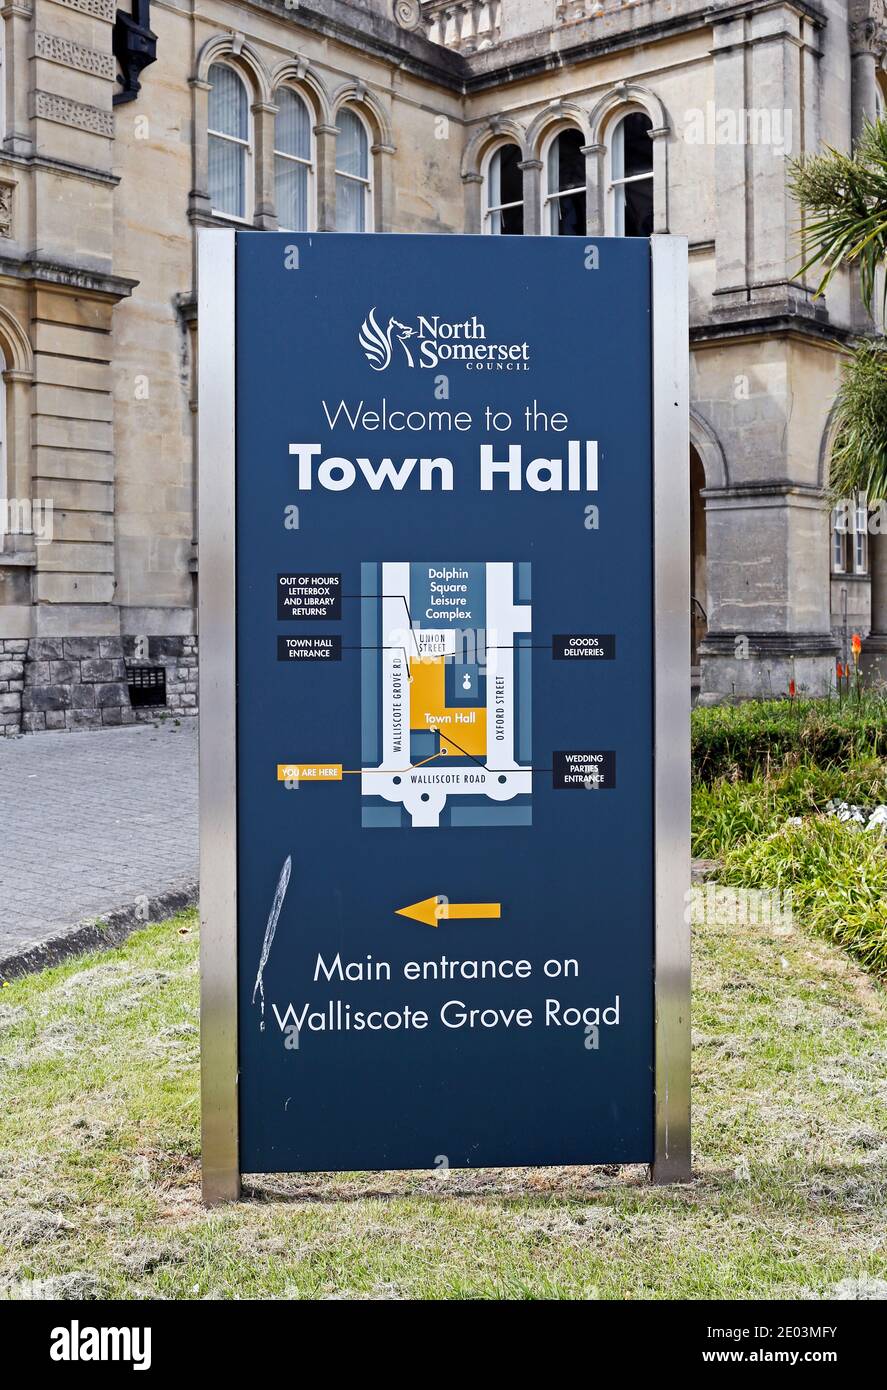 A sign giving directions to the various entrances to the town hall in Weston-super-Mare, UK Stock Photo